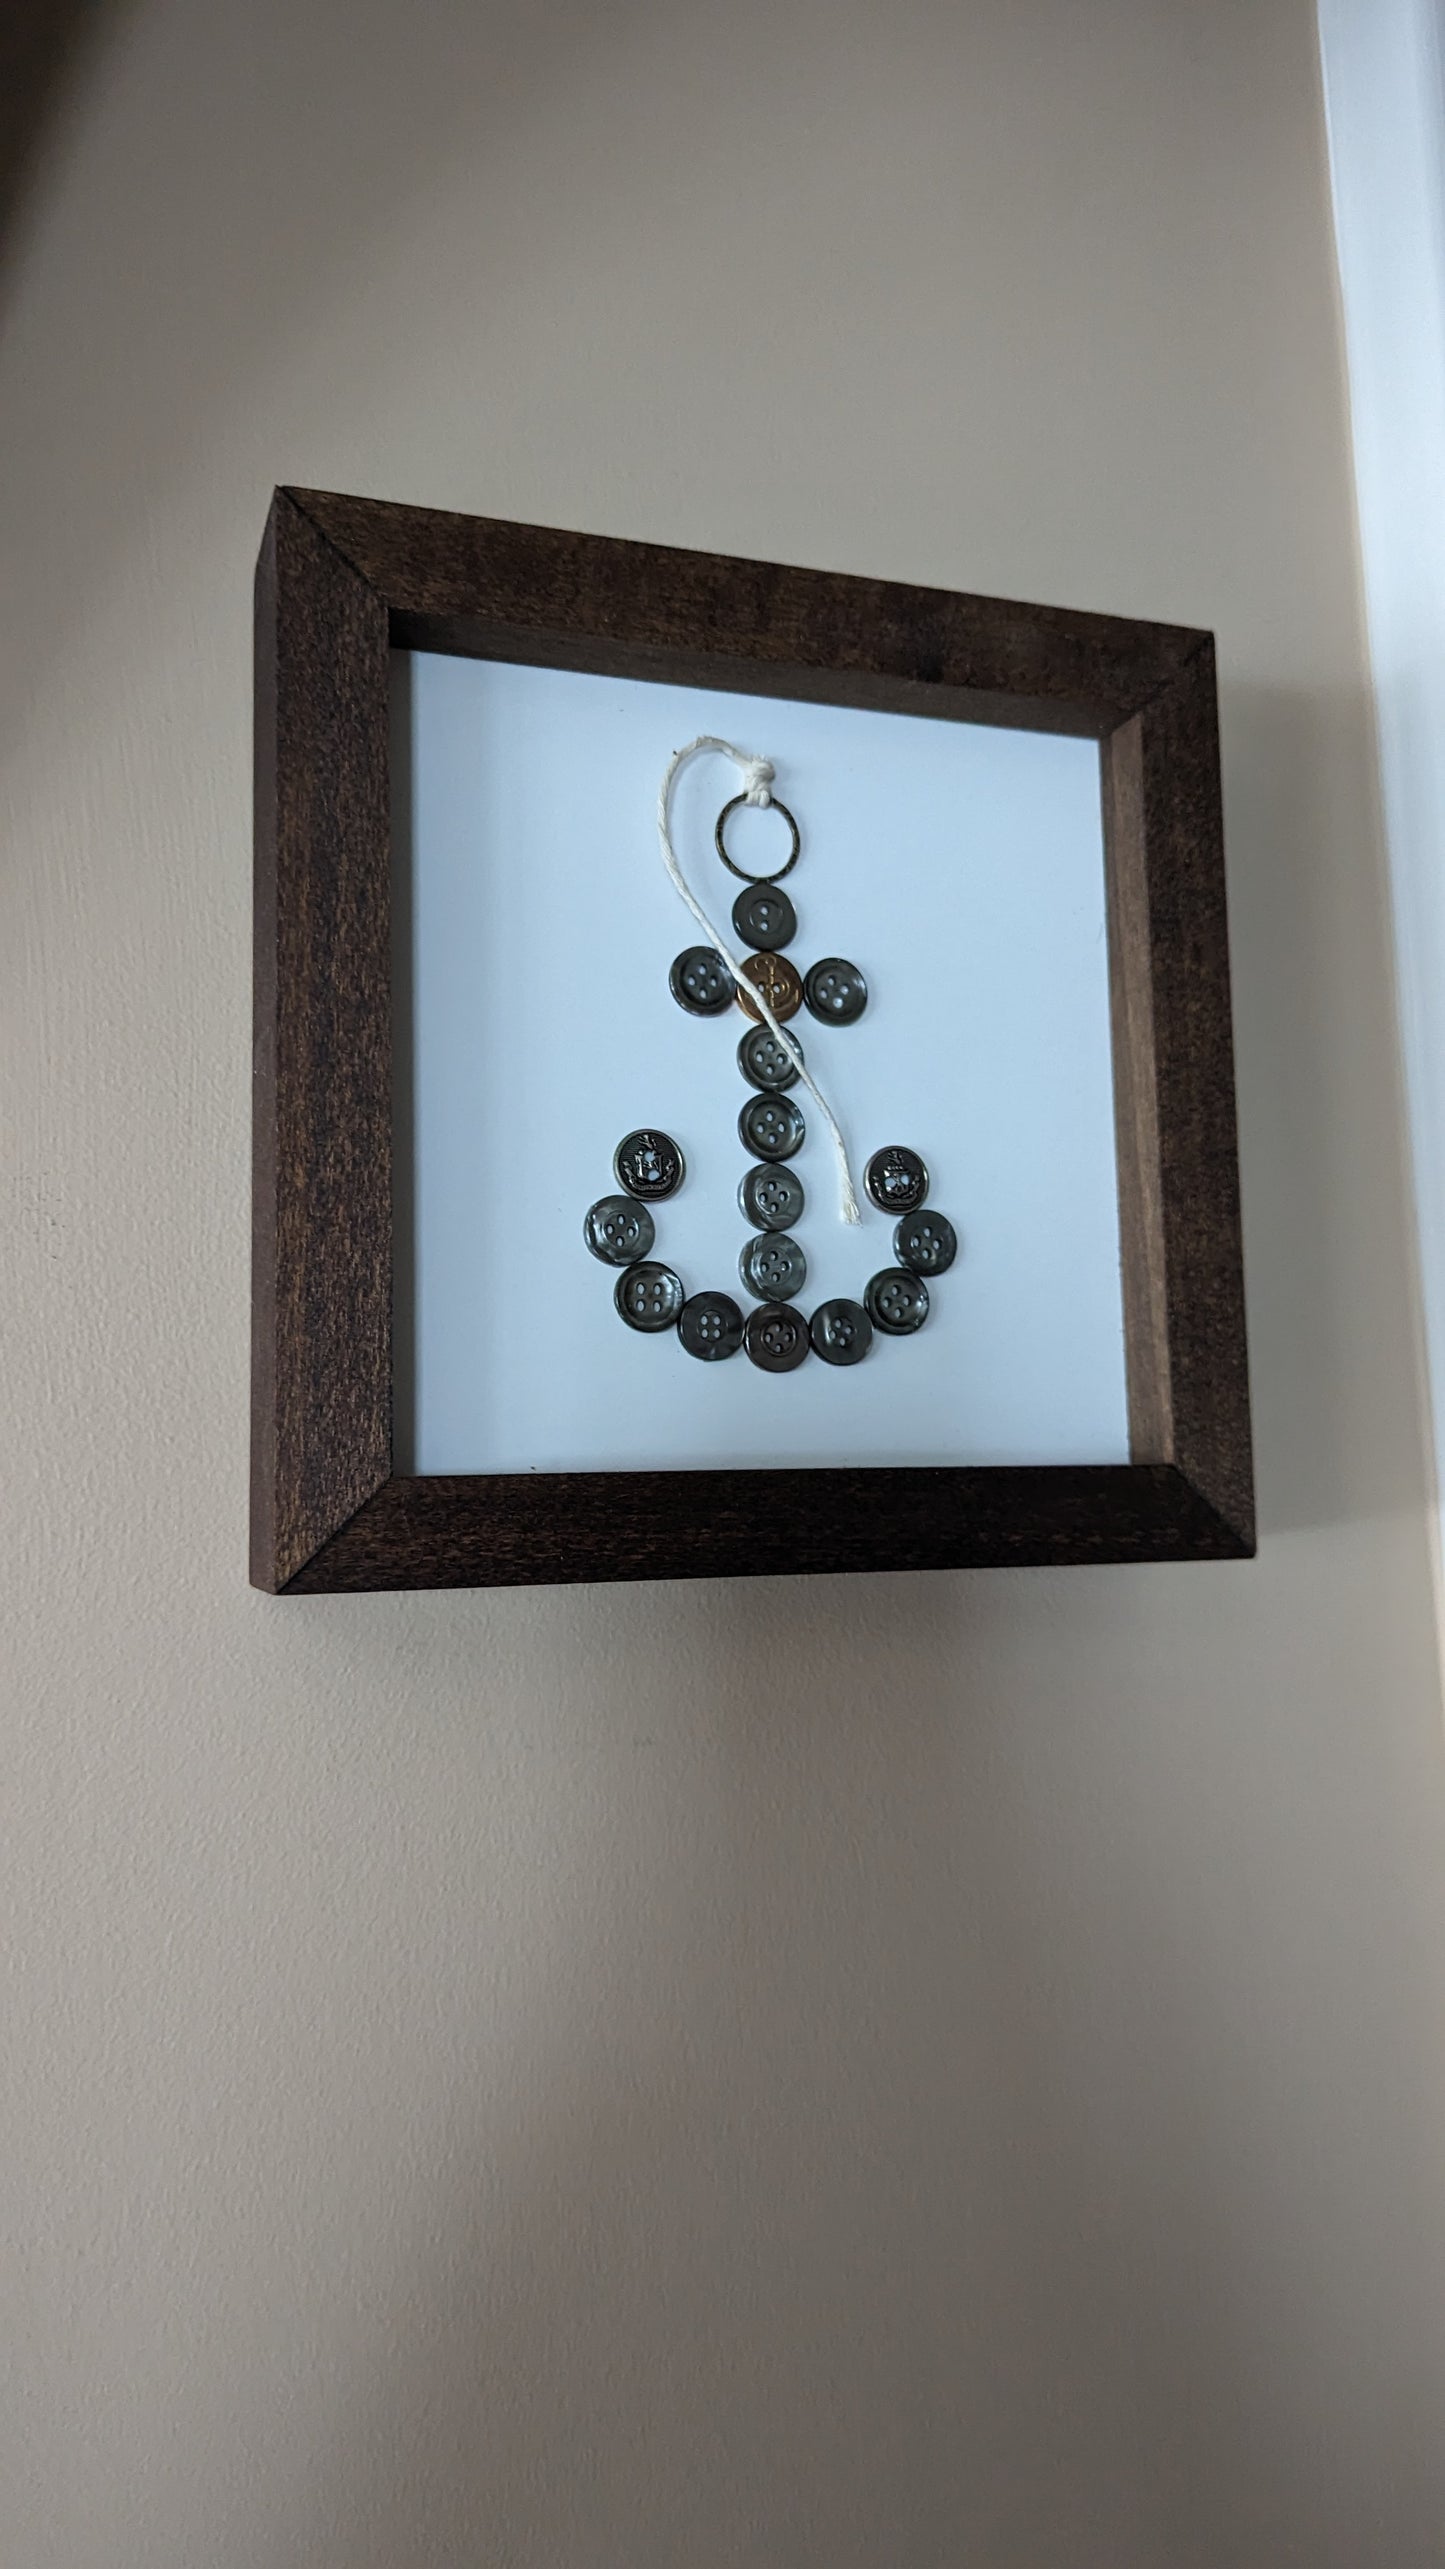 Anchor art made with vintage buttons, recycled jewelry piece and rope in 8 x 8 inch shadow box